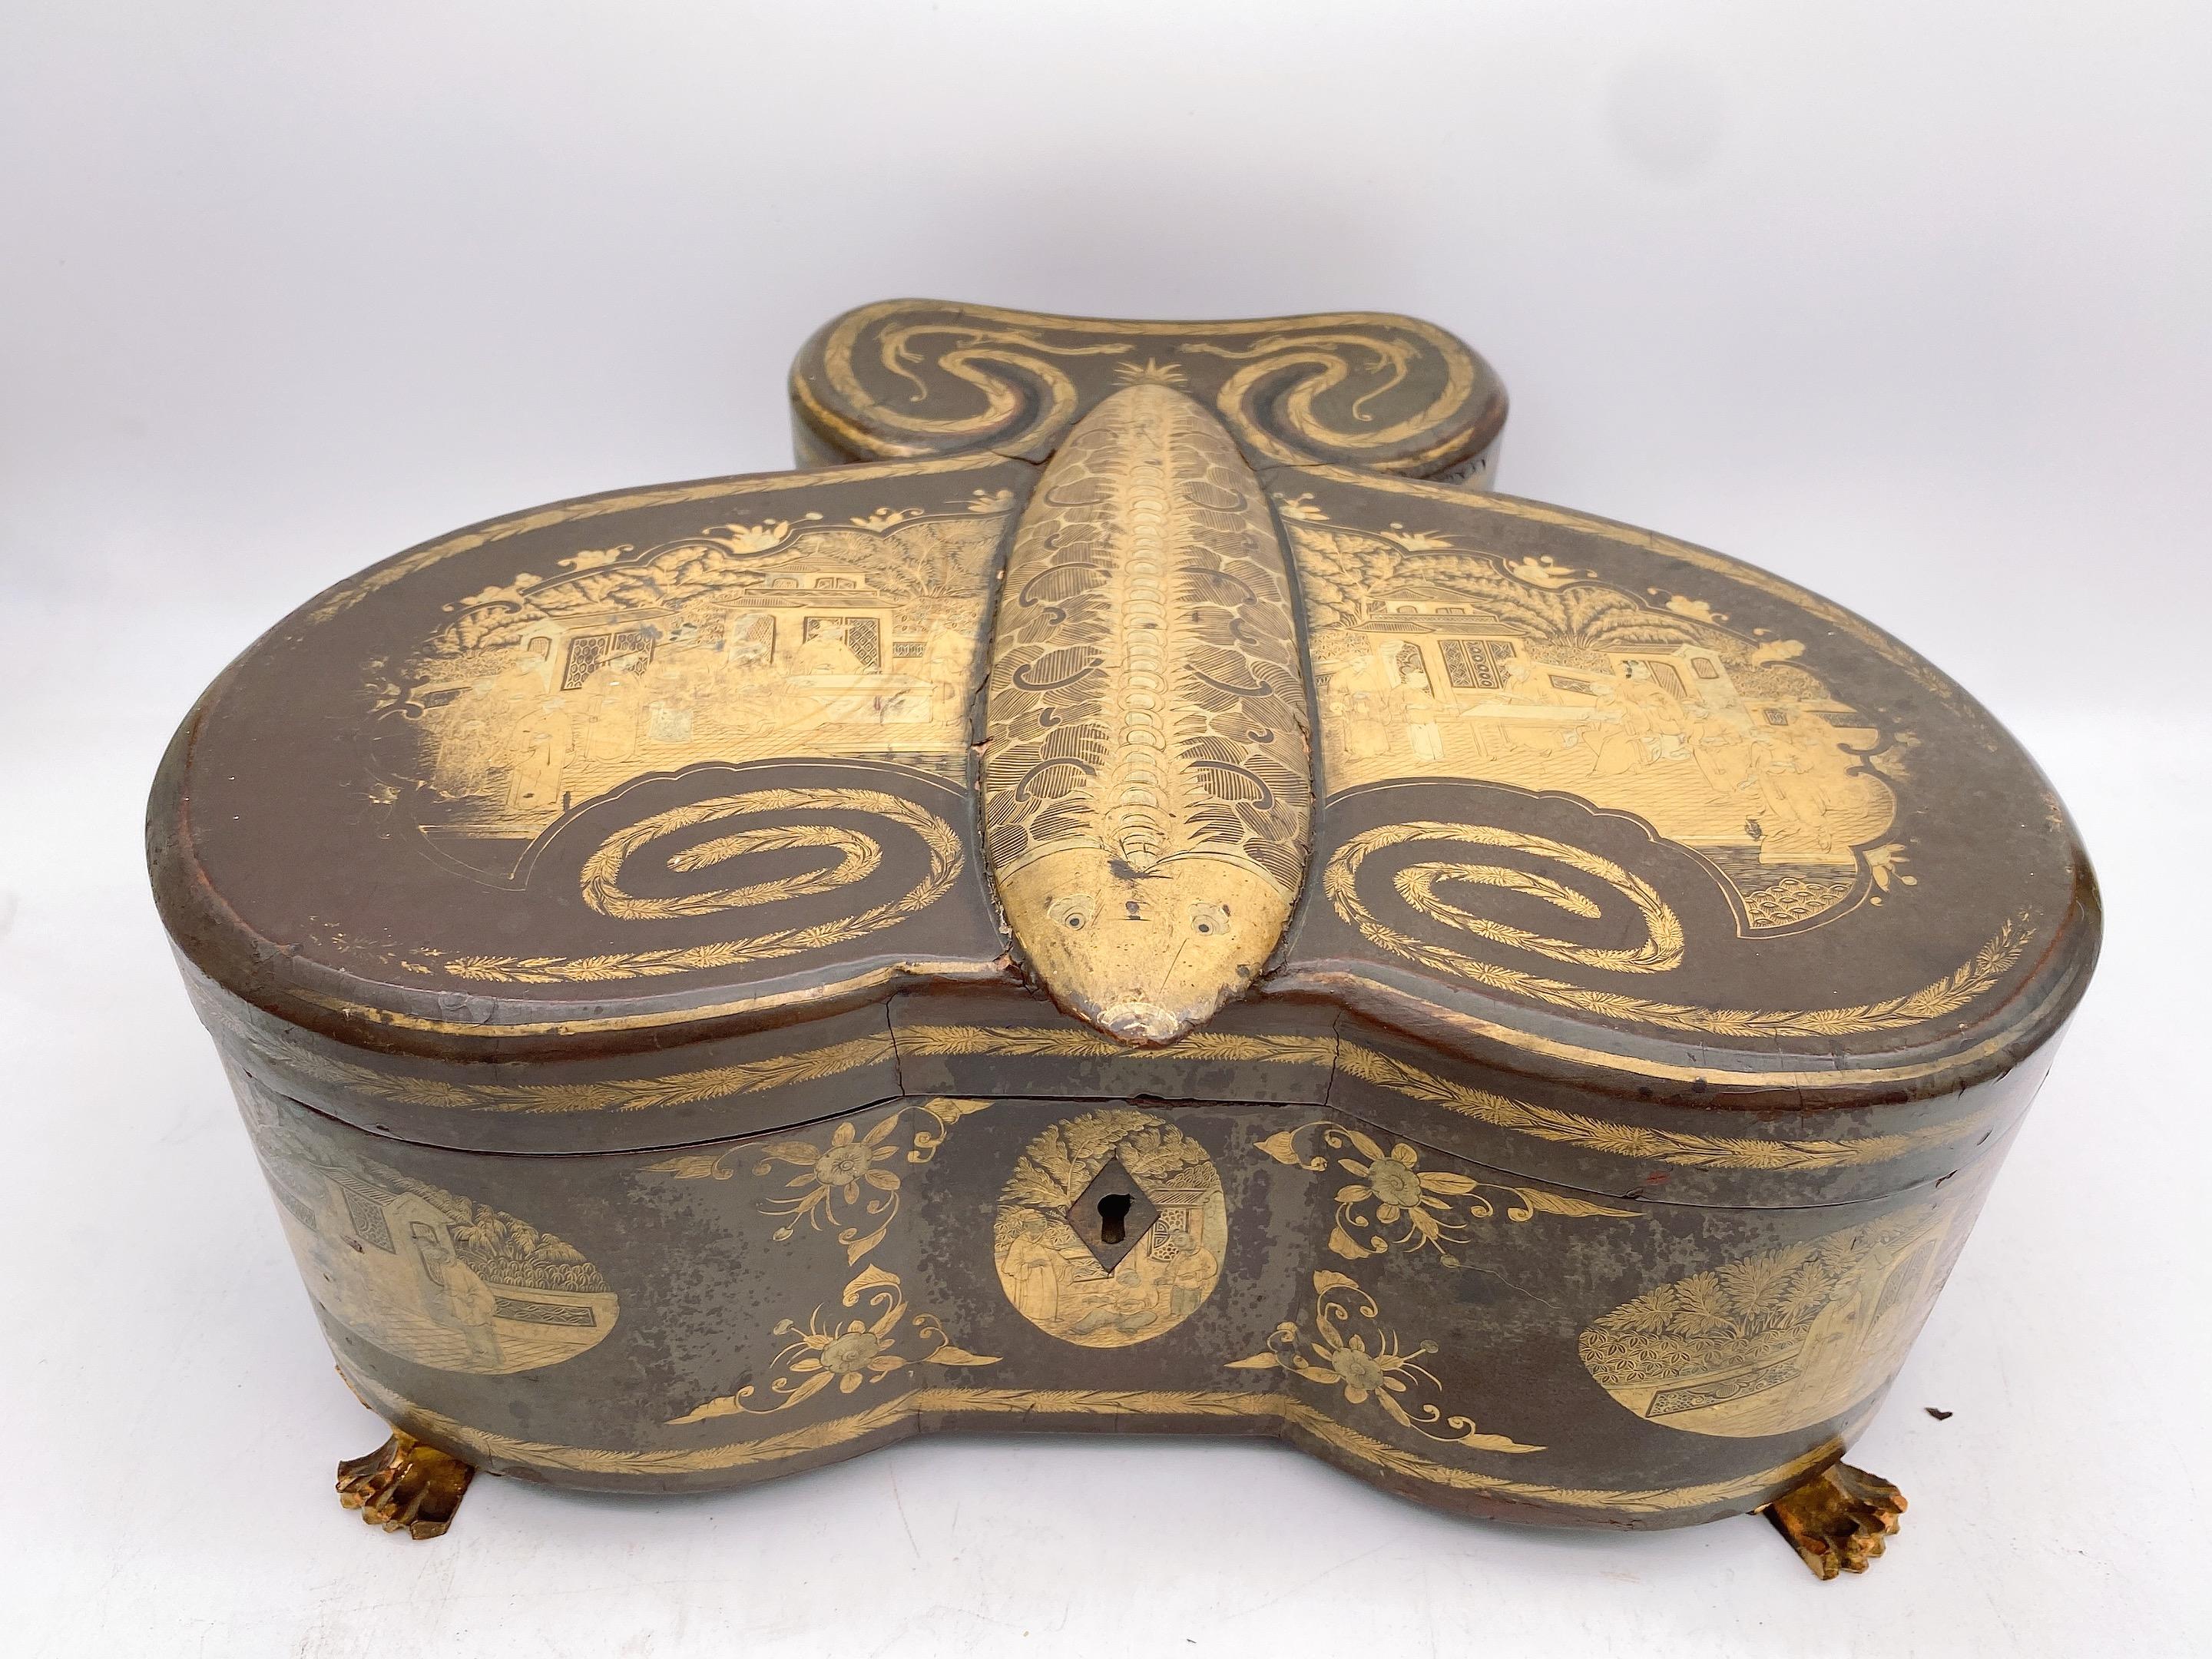 Rare 19th Century Antique Chinese Gilt Lacquer Butterfly Cased Pewter Tea Caddy For Sale 12